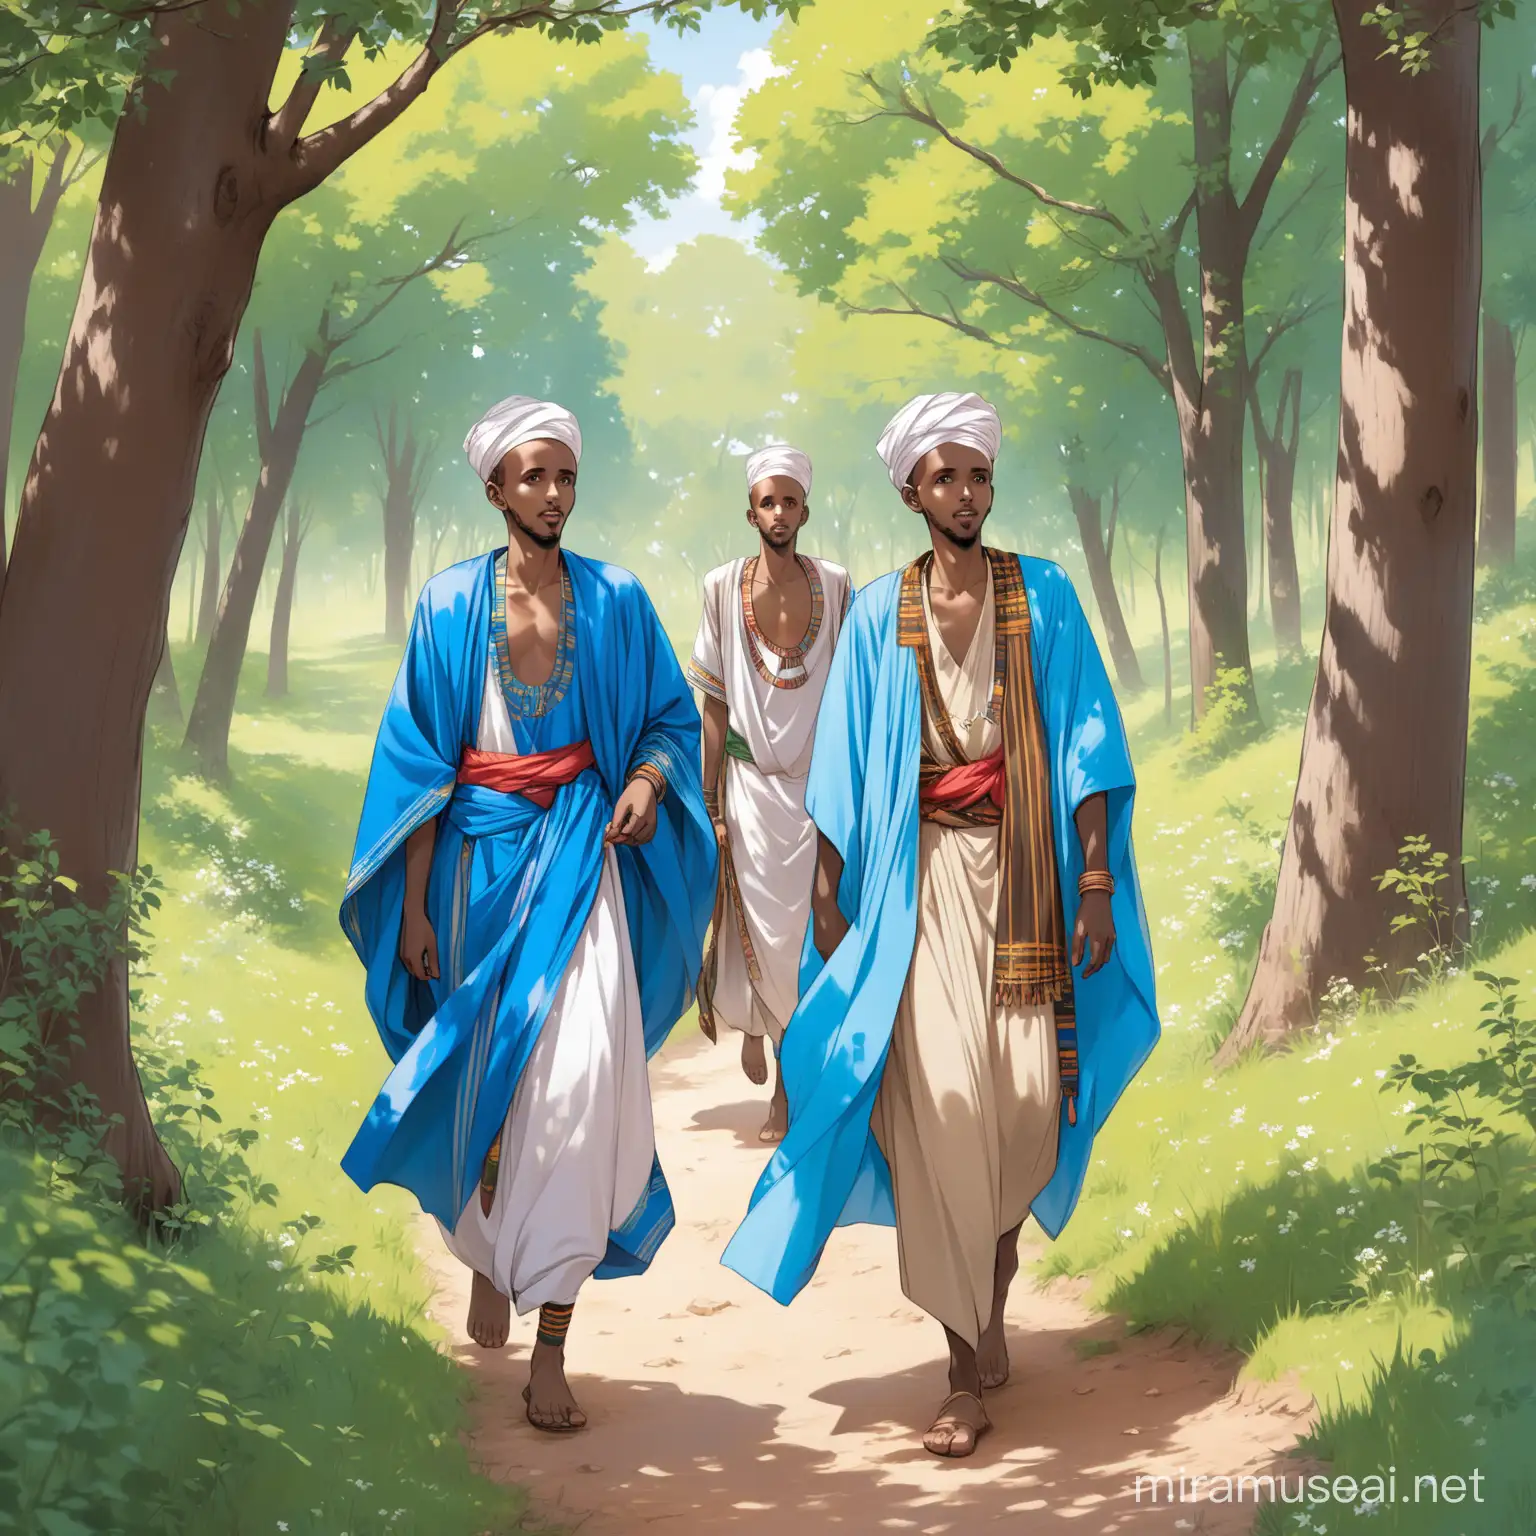 Somali Brothers in Traditional Attire Amidst Grazing Camels in a Lush Woods